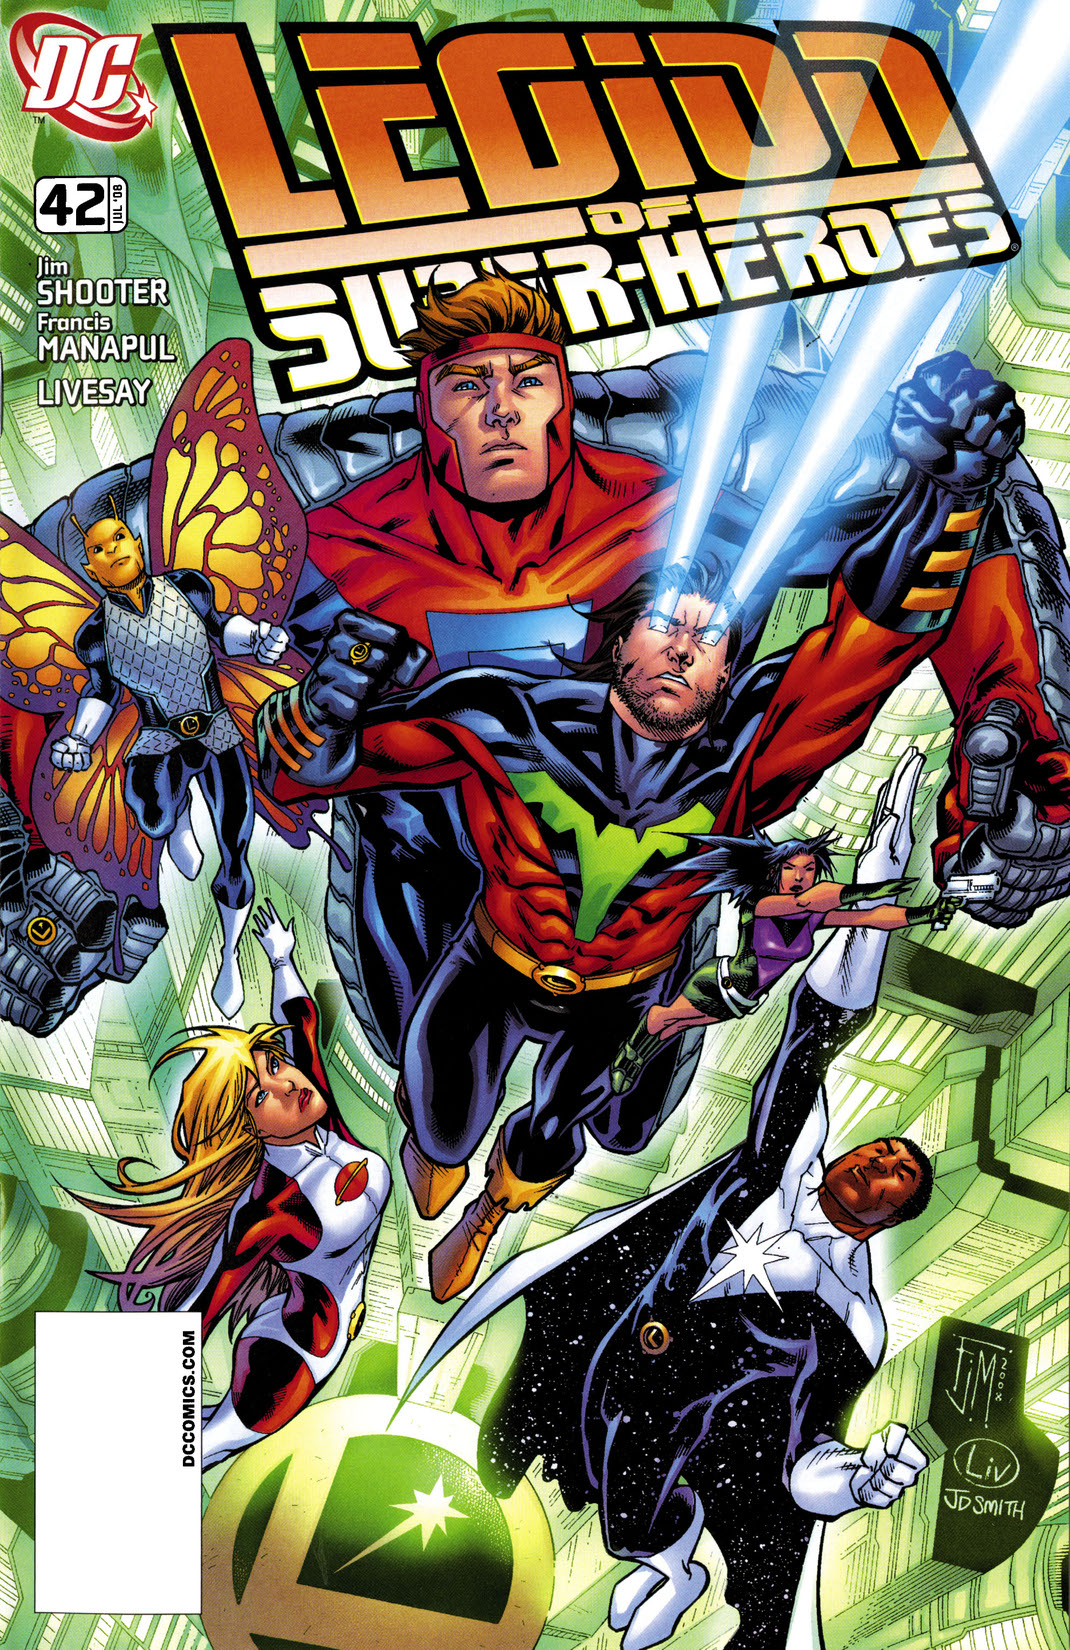 Legion of Super-Heroes (2007-) #42 preview images